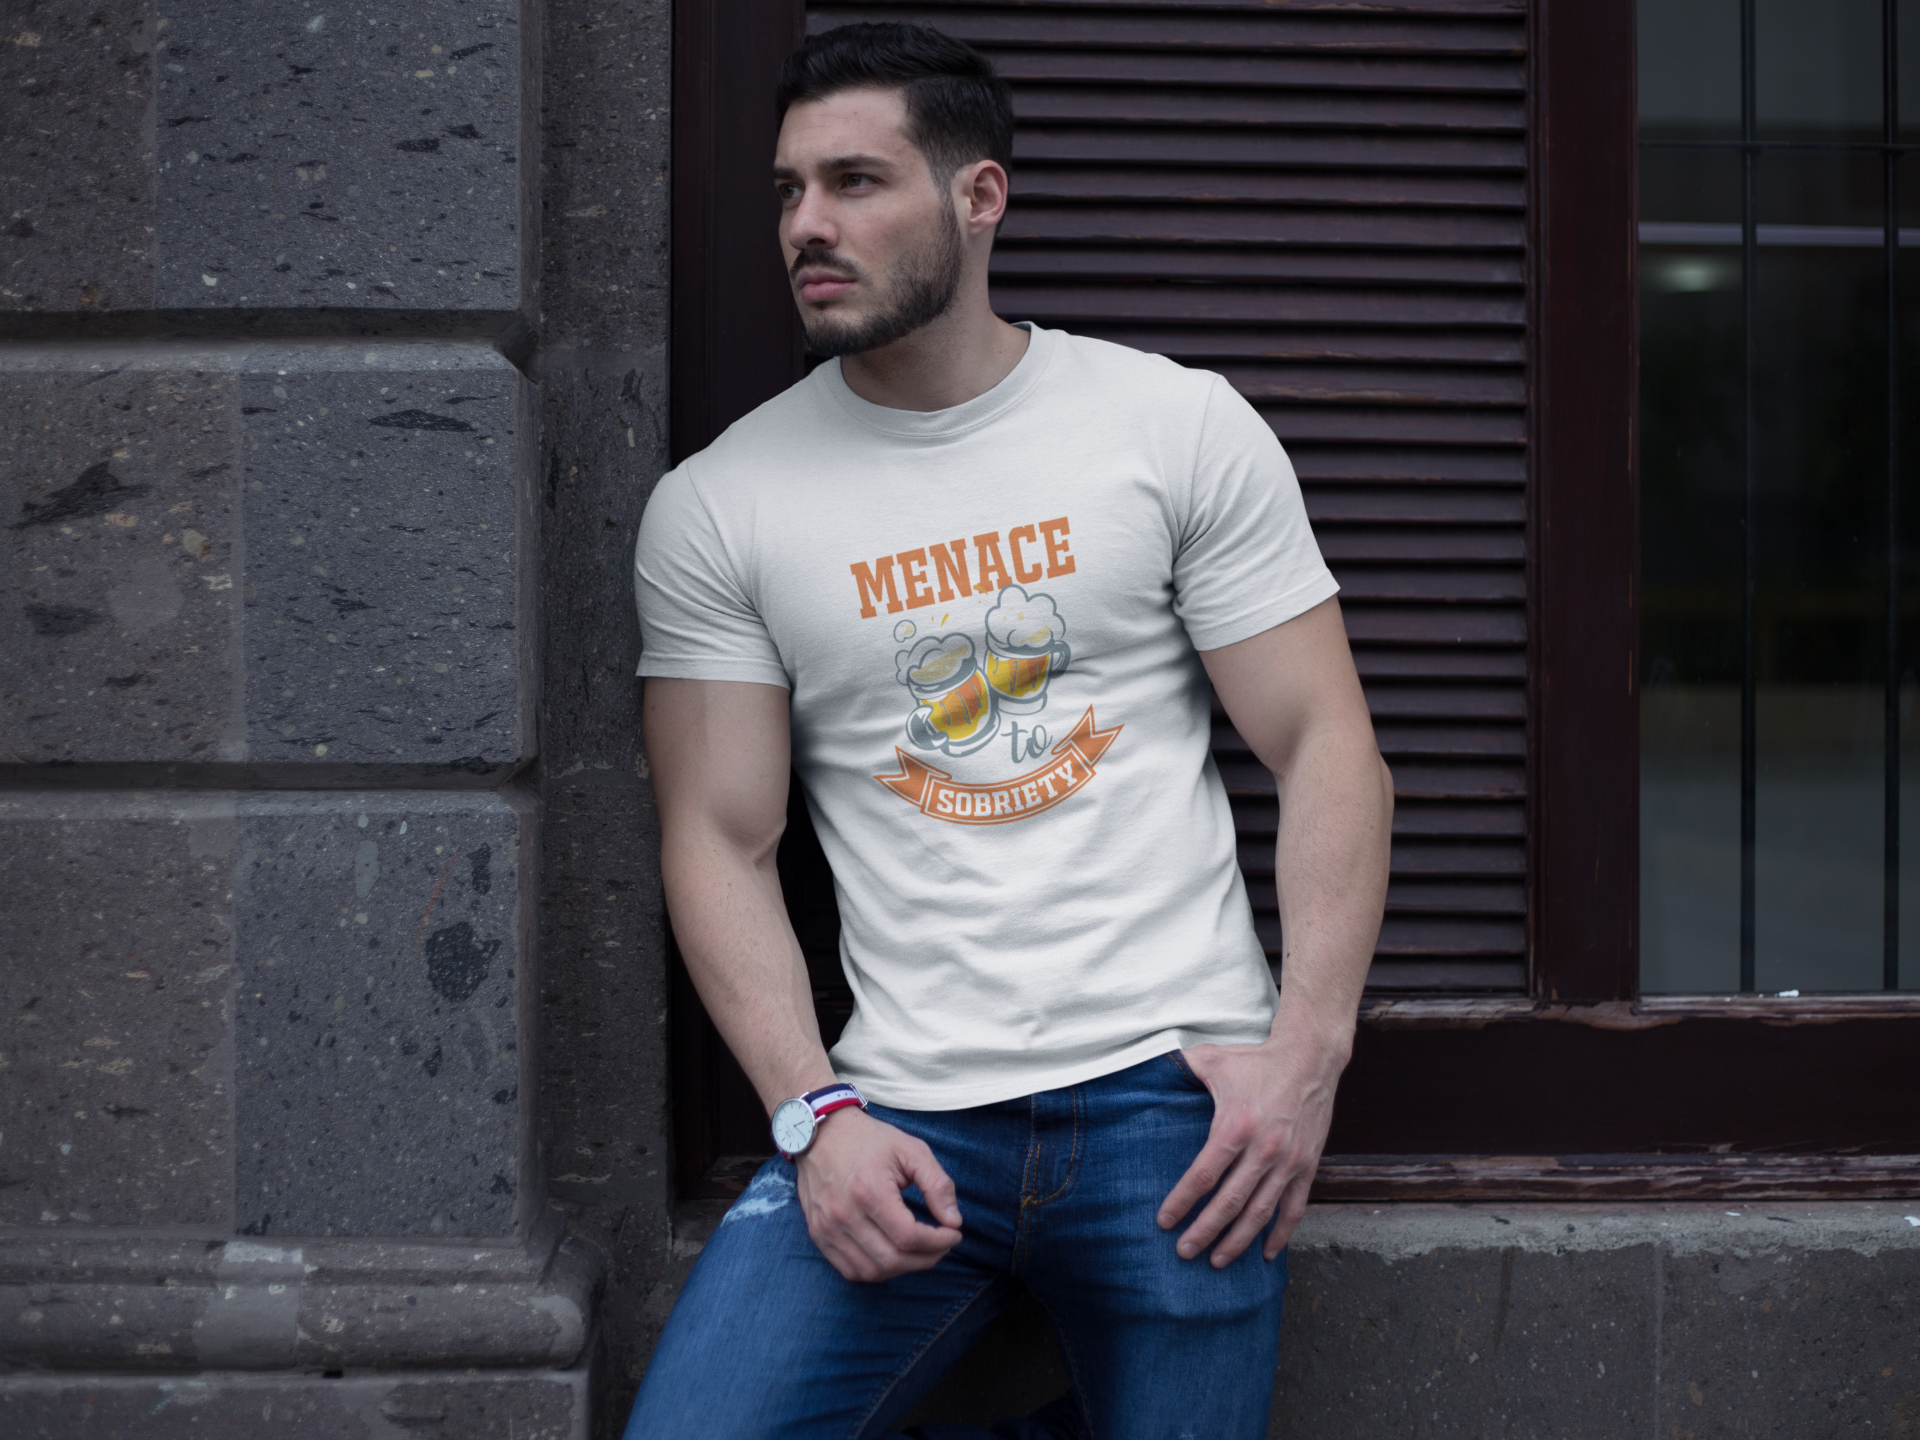 Menace to Sobriety; 100% cotton Tee Removable tag for comfort